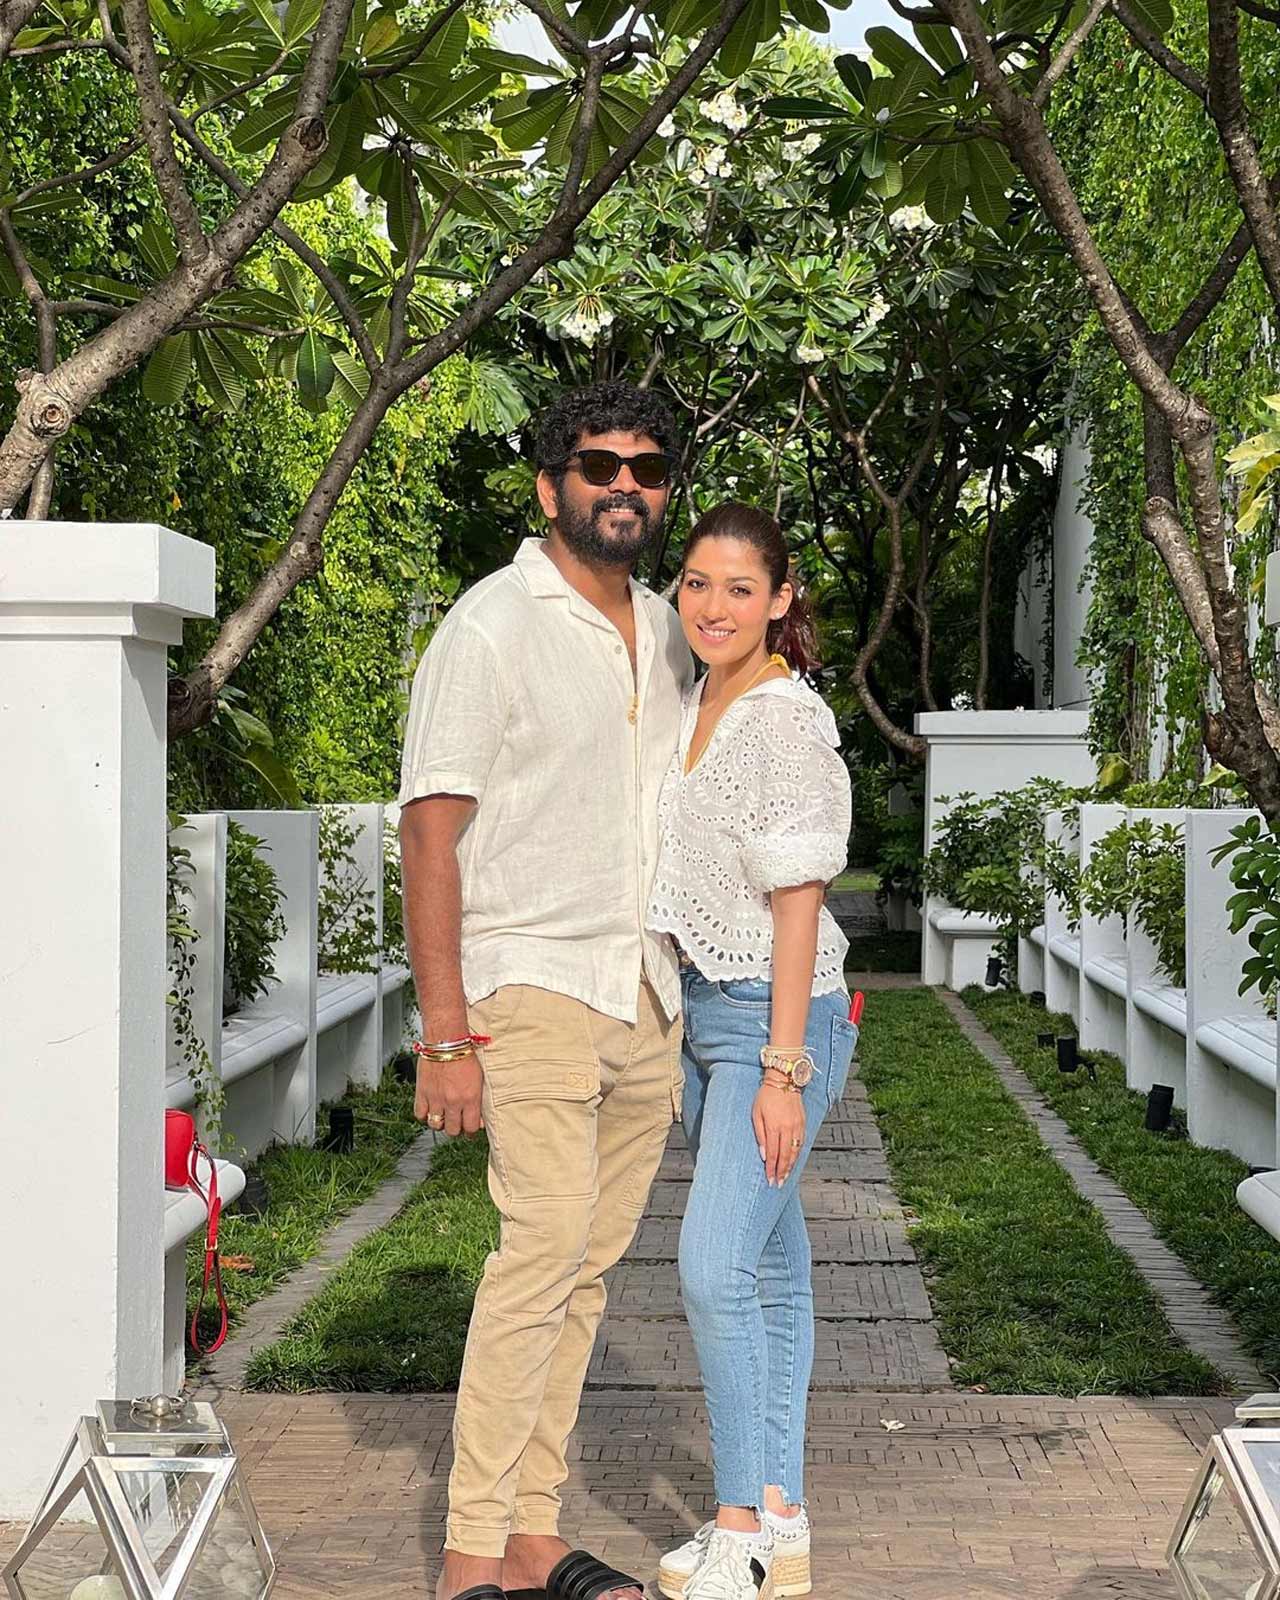 The couple has been sharing each other's photos on Instagram. On Monday, Vignesh shared some romantic photos of them. In the pictures, both Nayanthara and Vignesh look cosy and relaxed. Nayanthara is seen wearing a yellow summer dress while Vignesh kept it casual in a basic t-shirt and pants